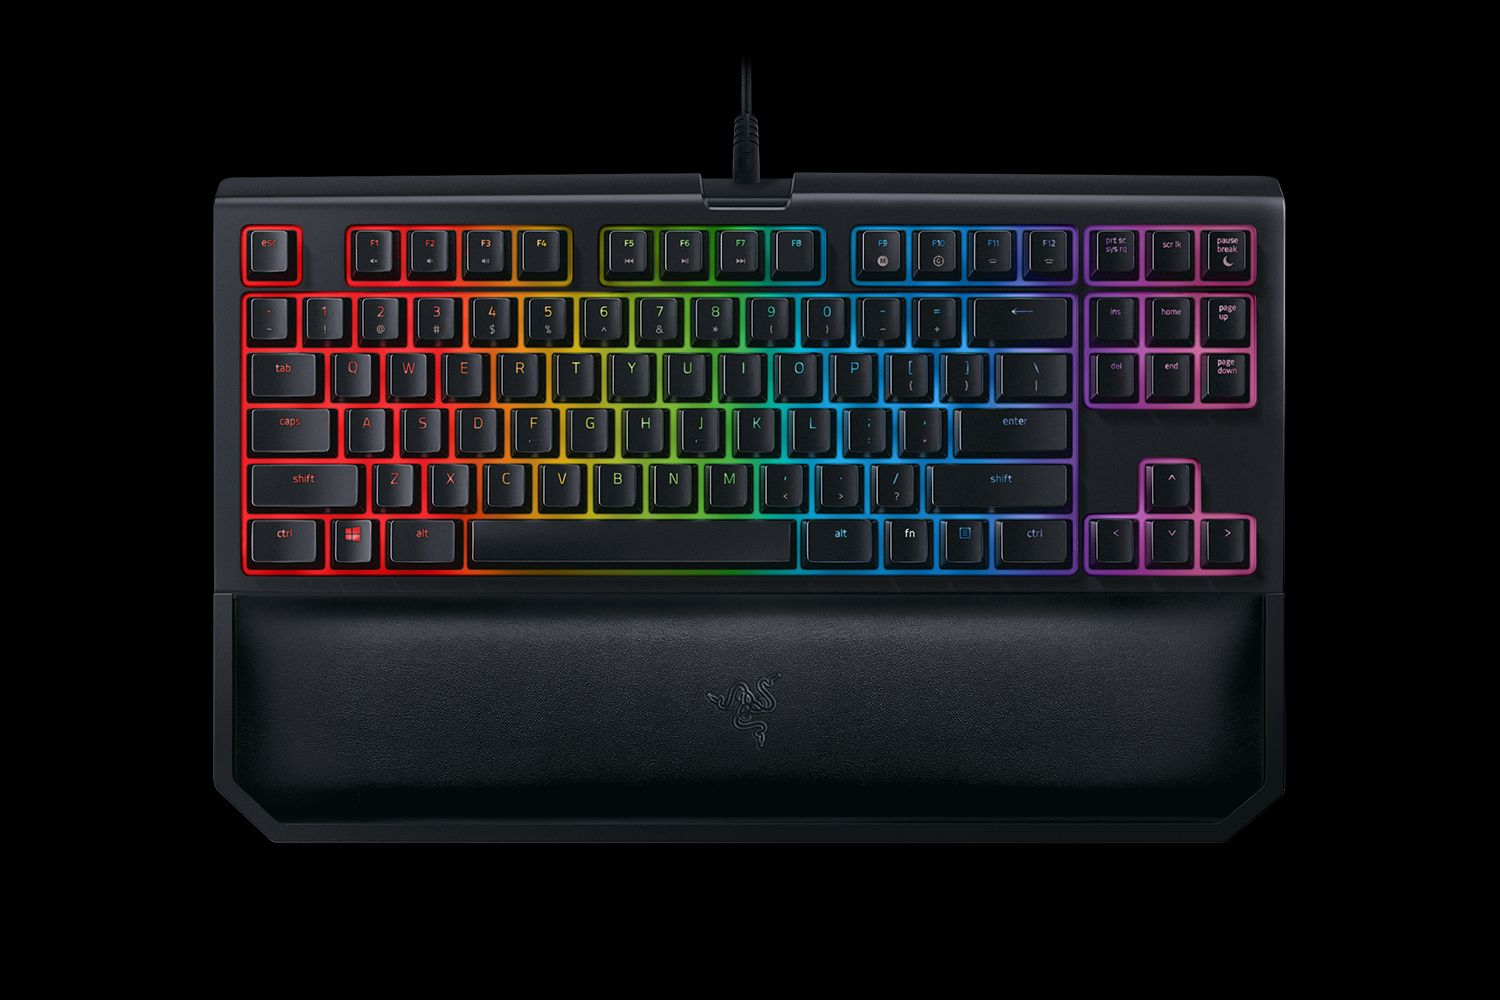 Razer Launches New Tournament Edition Keyboard - Built With Portability and Speed in Mind